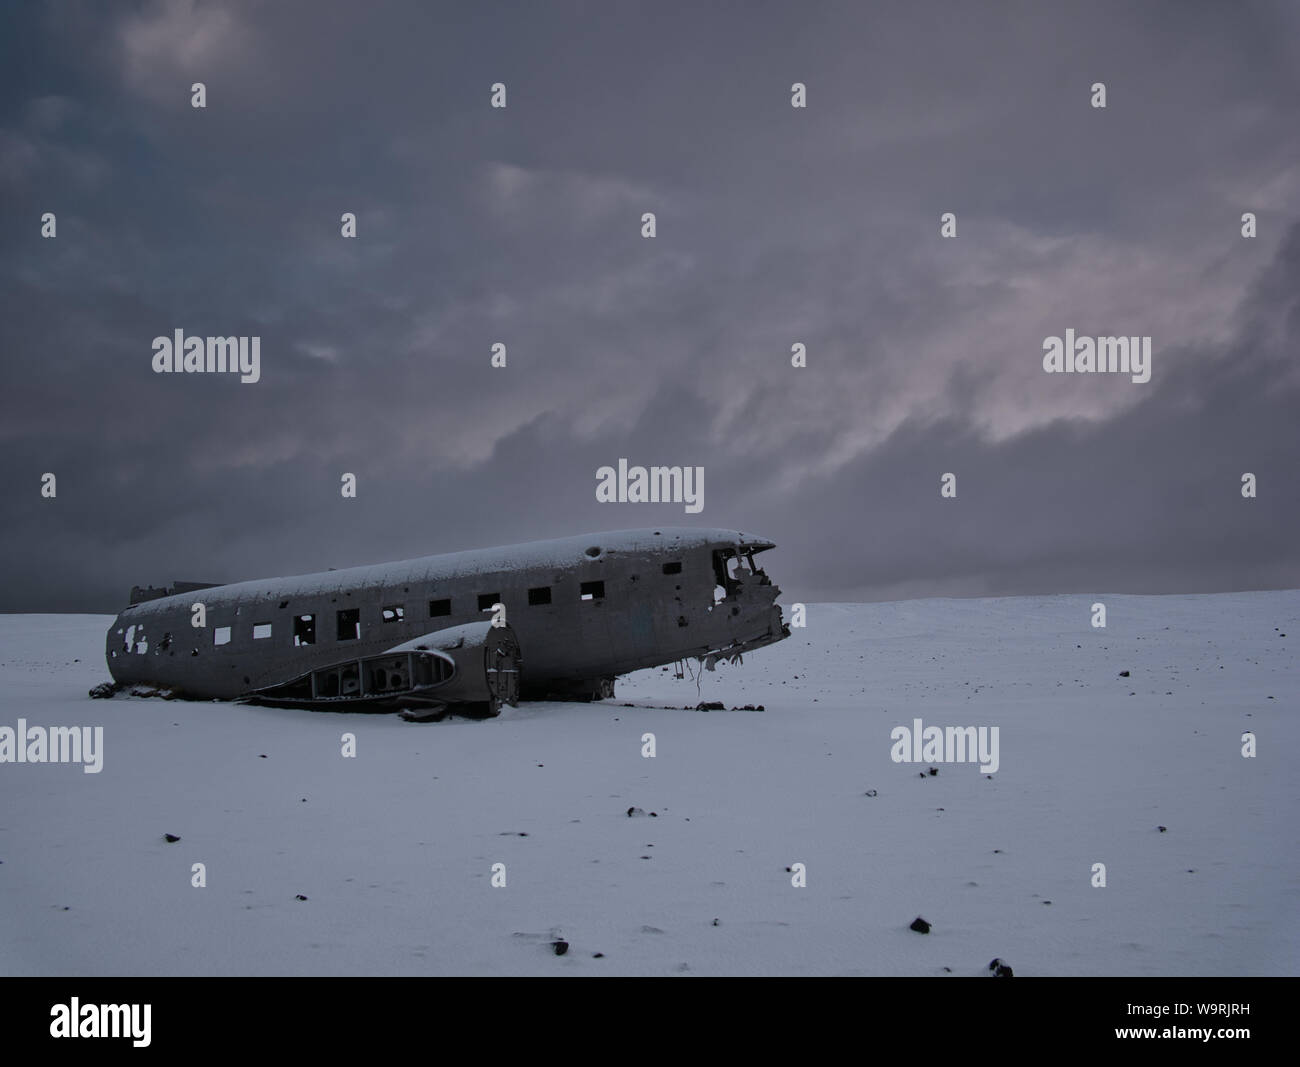 Crashed plane on a snowy field. Photo from March in Iceland Stock Photo